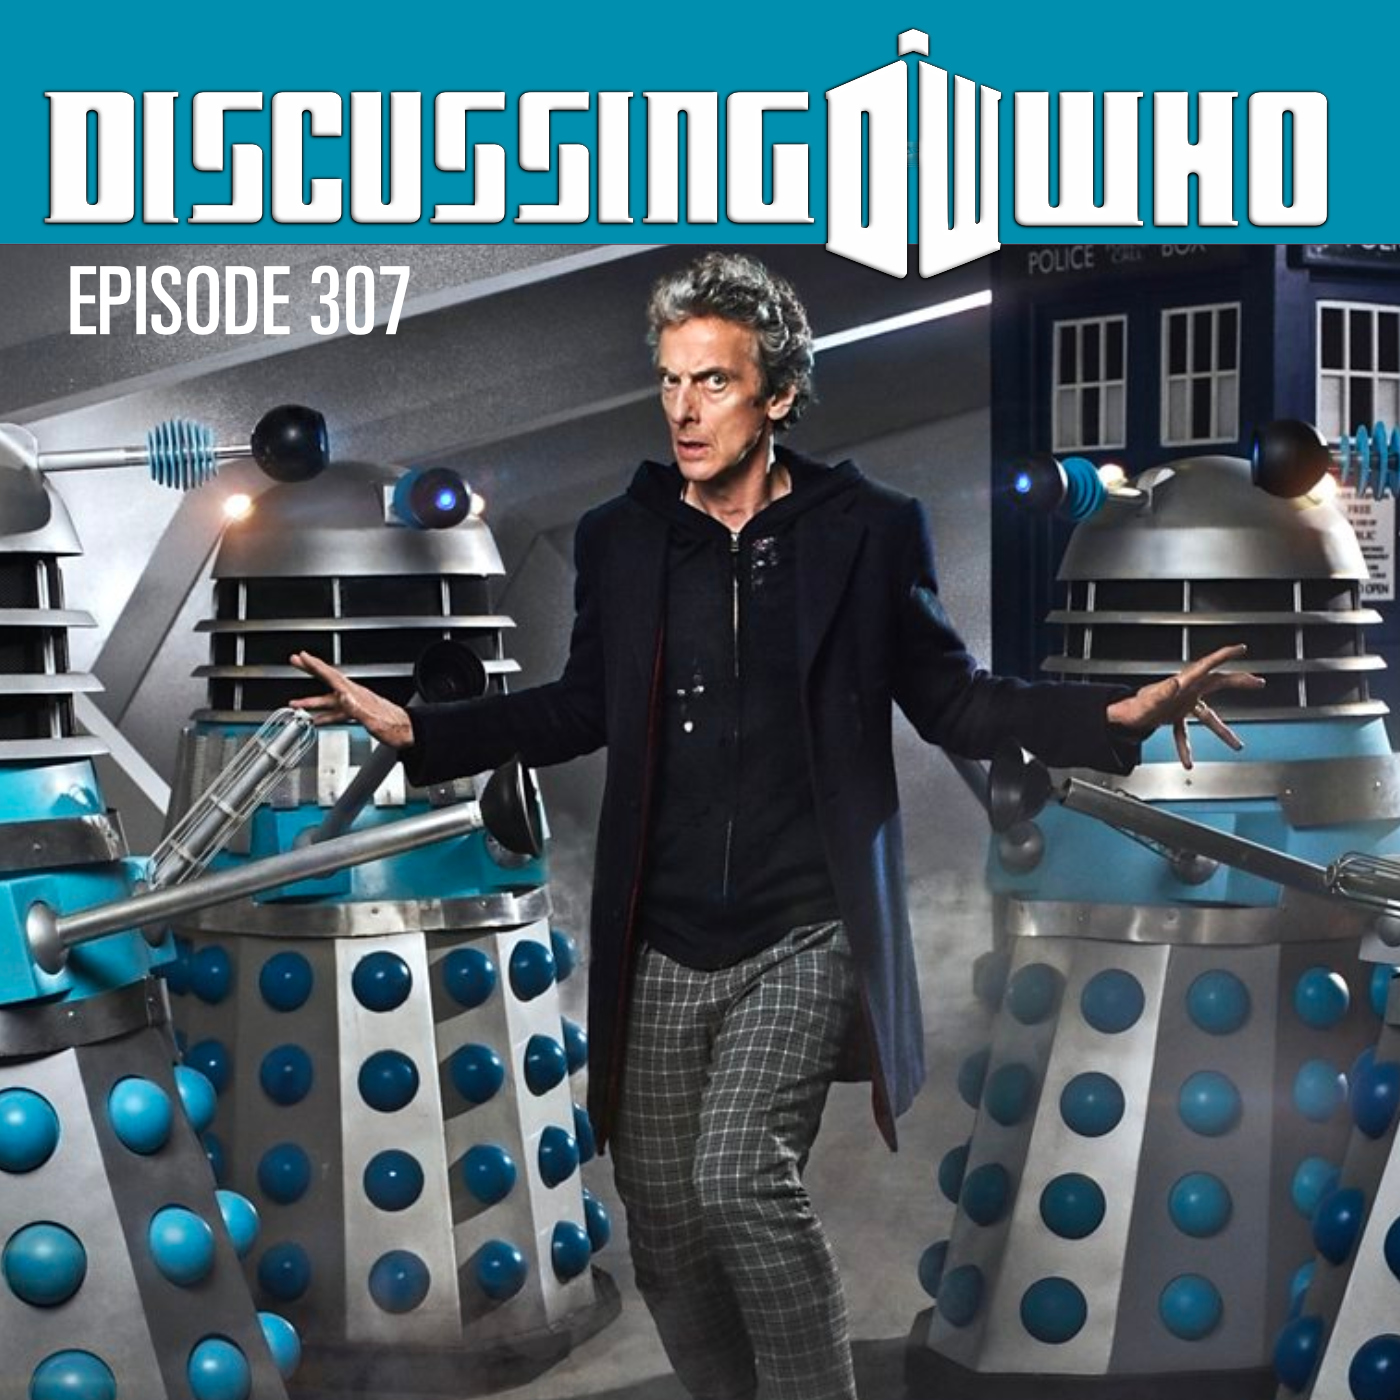 Episode 307: Review of The Witch’s Familiar, Doctor Who Series 9 Episode 2